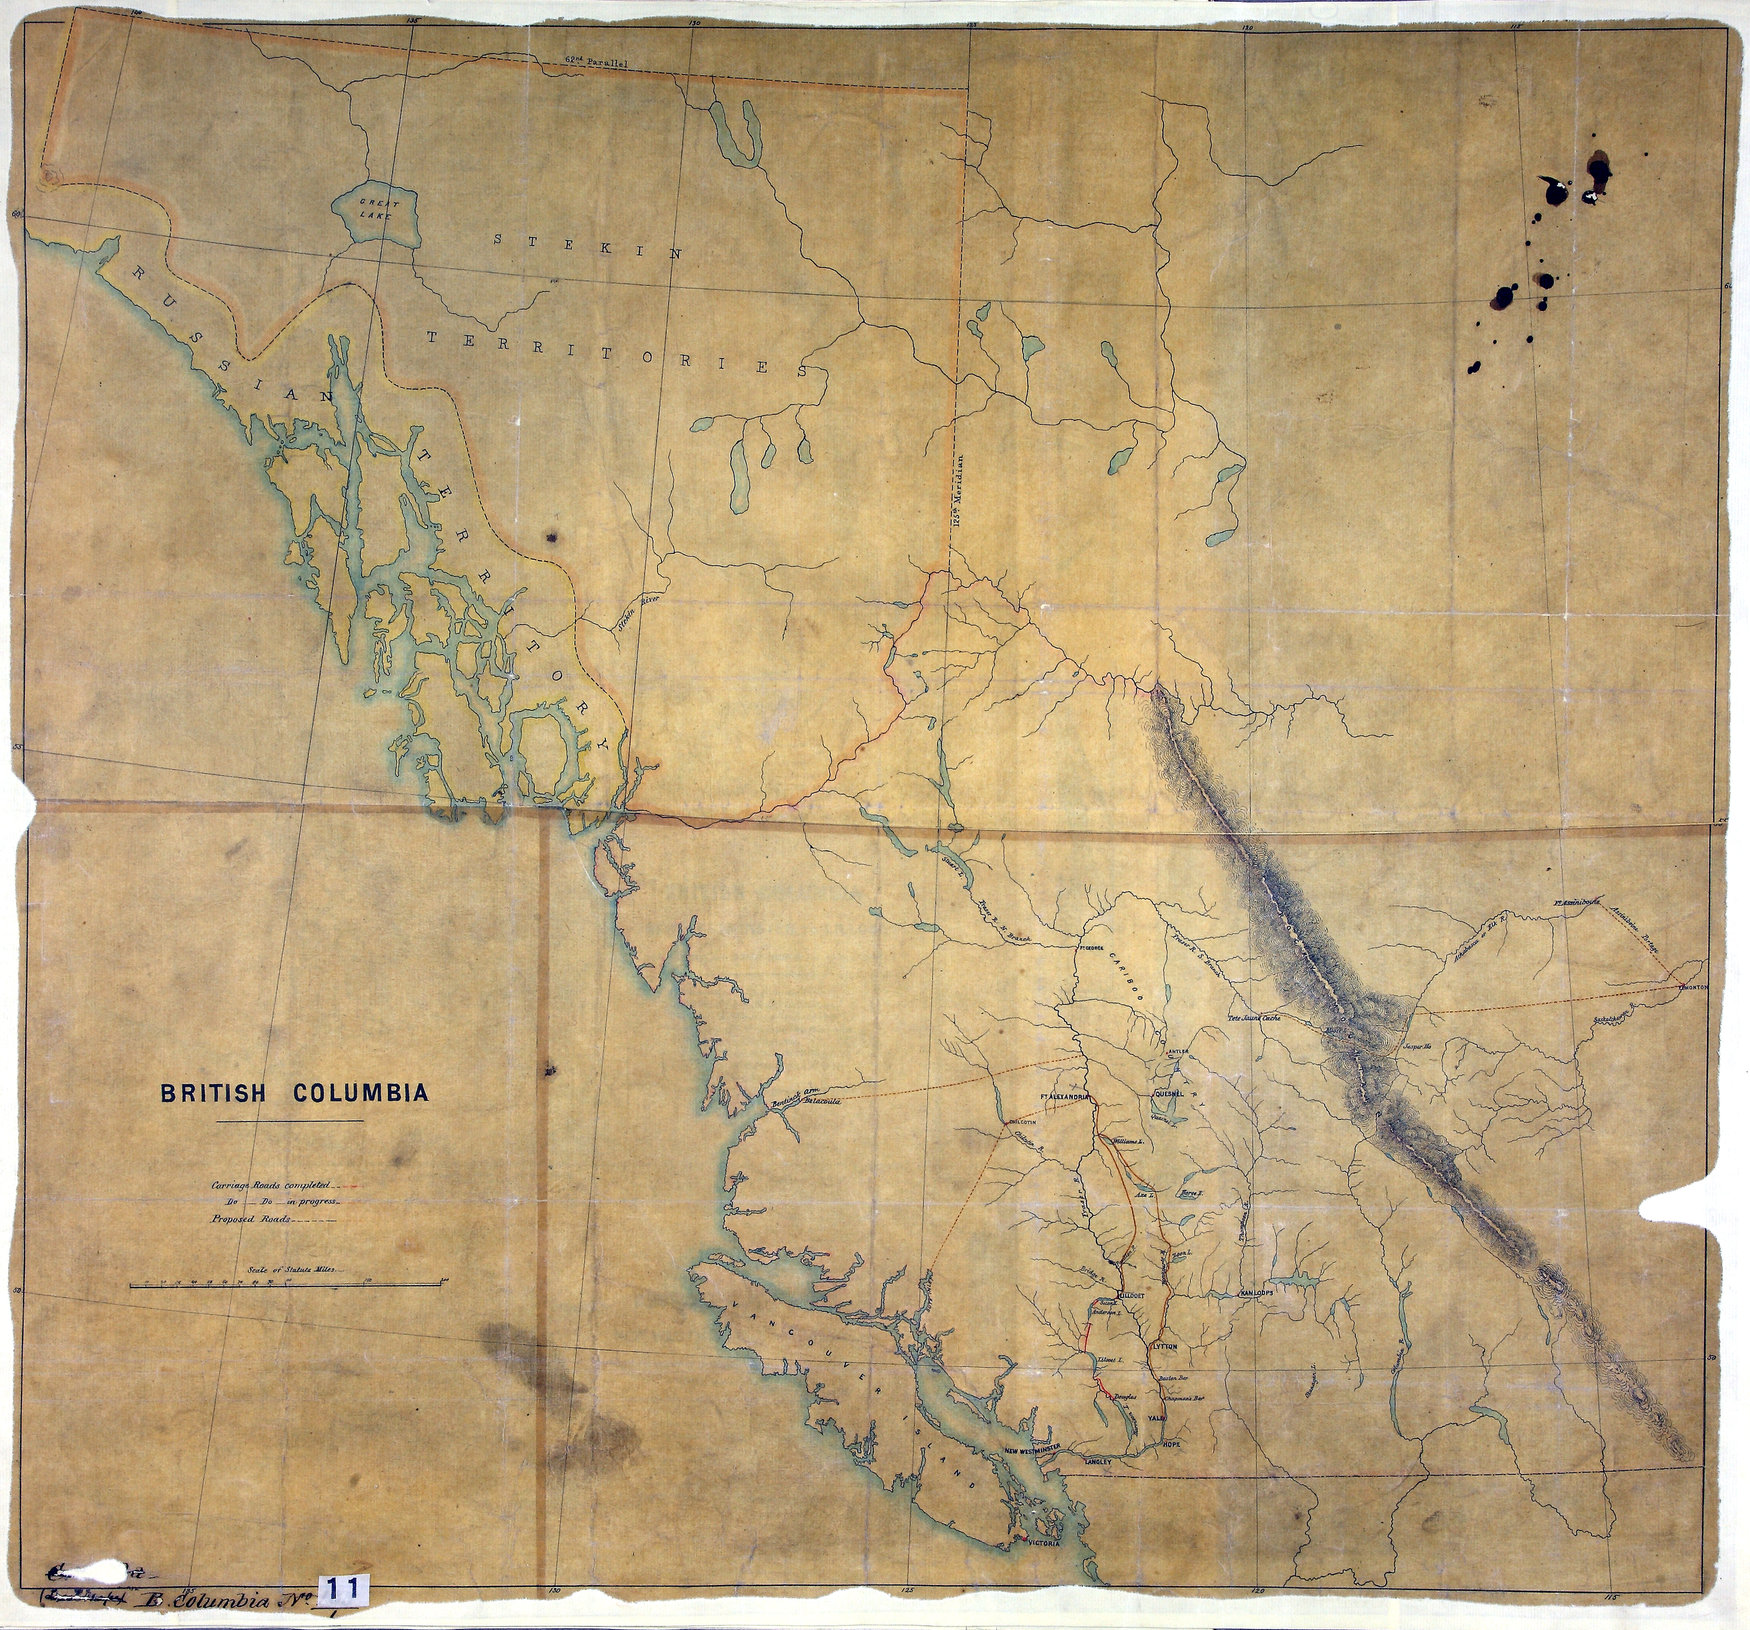 British Columbia, showing carriage roads completed, in progress, and proposed.